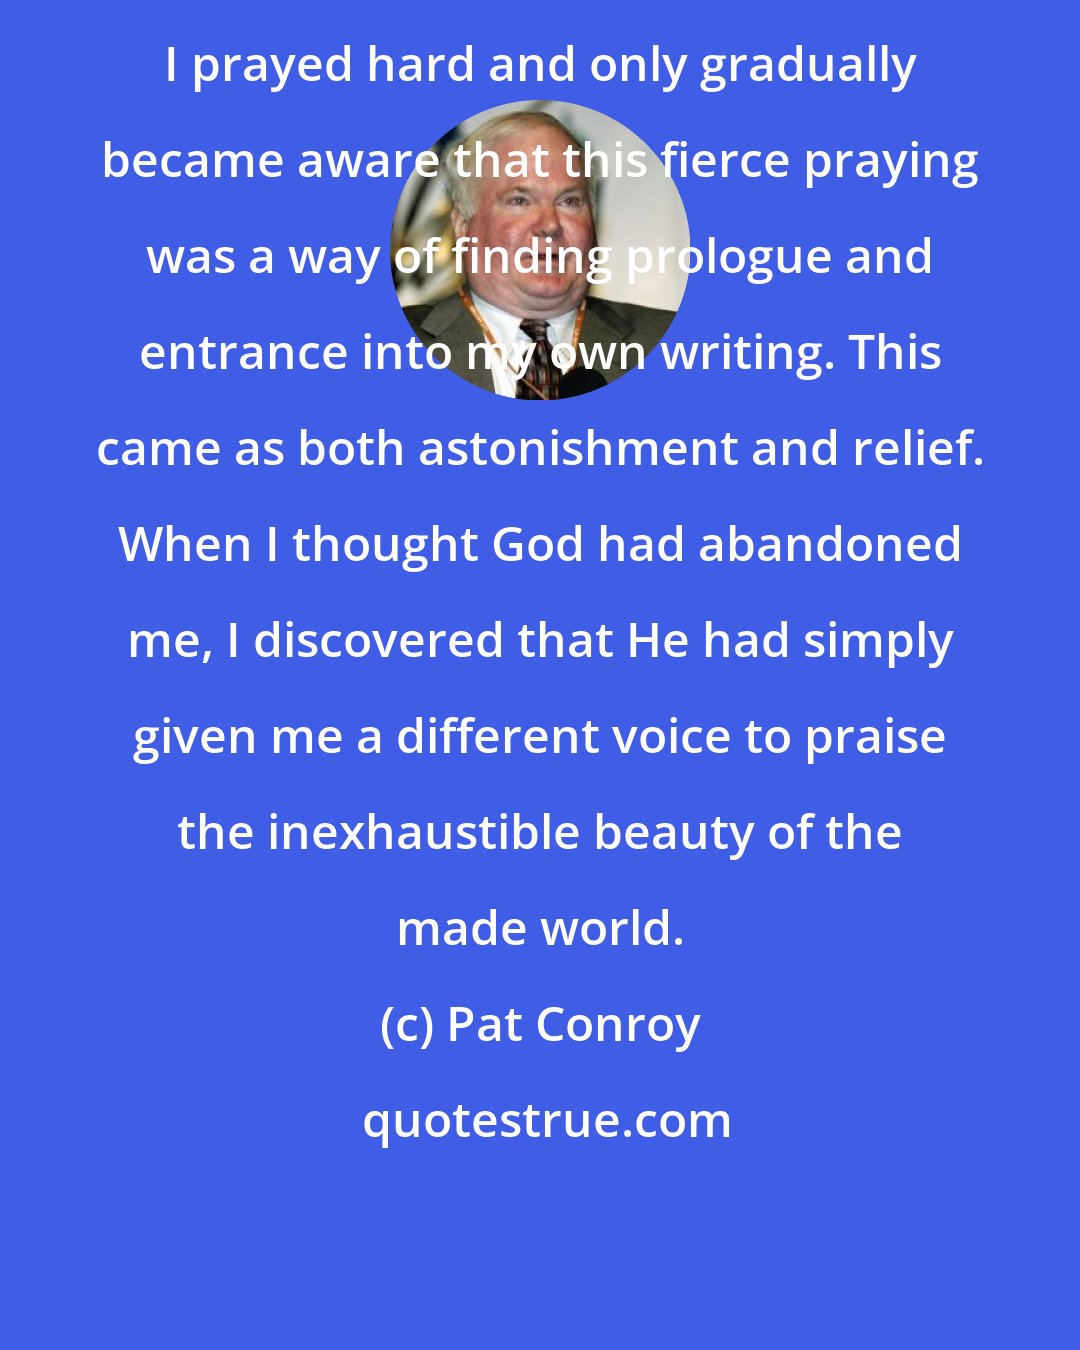 Pat Conroy: I prayed hard and only gradually became aware that this fierce praying was a way of finding prologue and entrance into my own writing. This came as both astonishment and relief. When I thought God had abandoned me, I discovered that He had simply given me a different voice to praise the inexhaustible beauty of the made world.